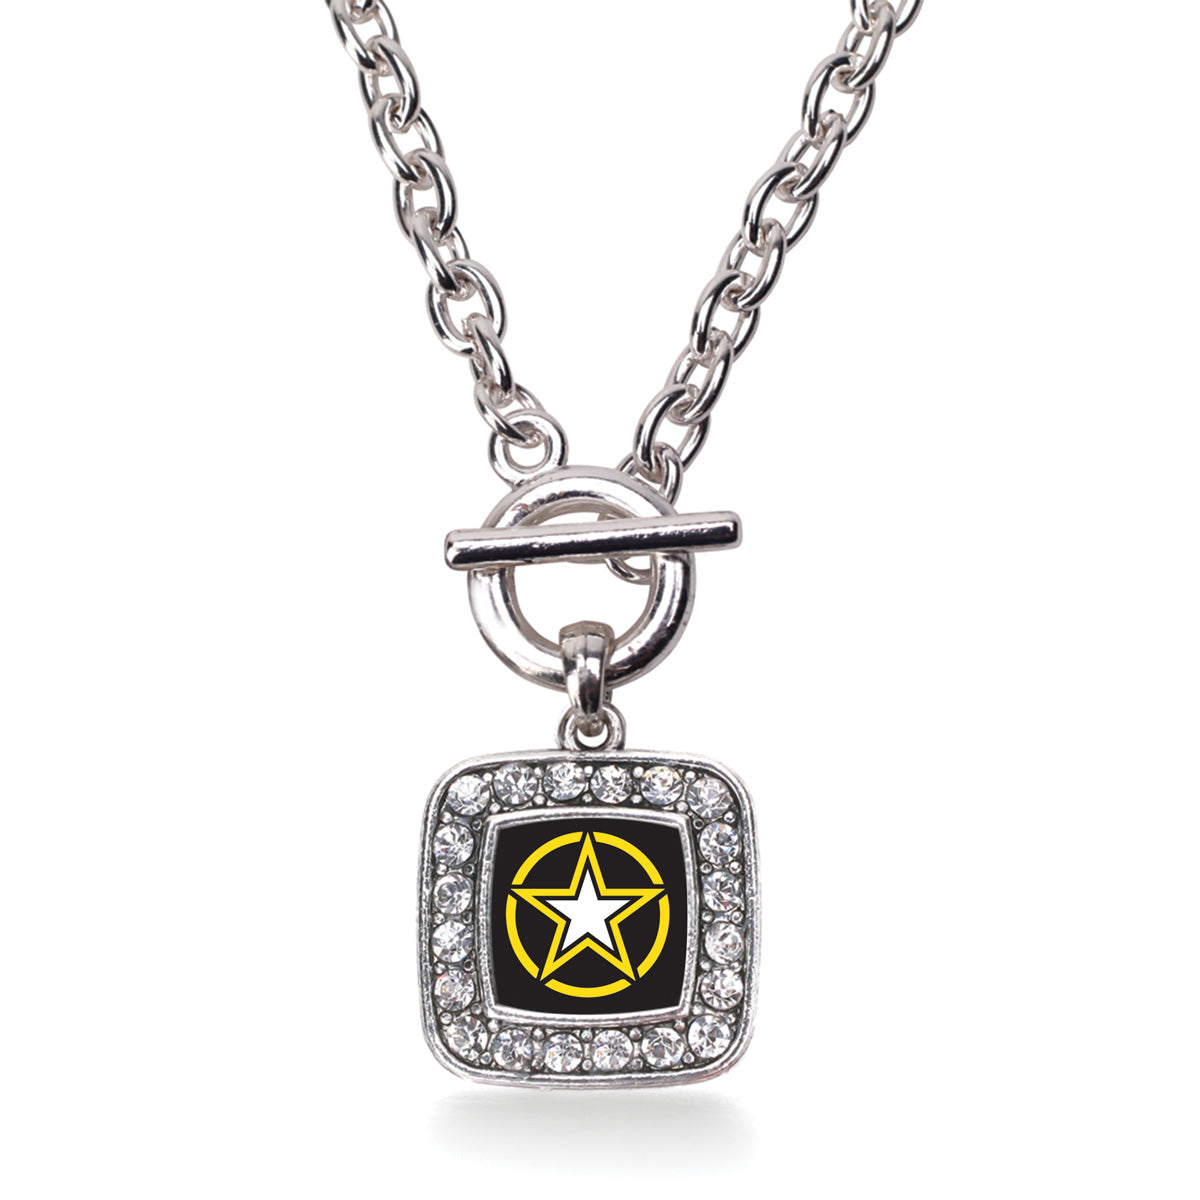 Silver Army Star Square Charm Toggle Necklace